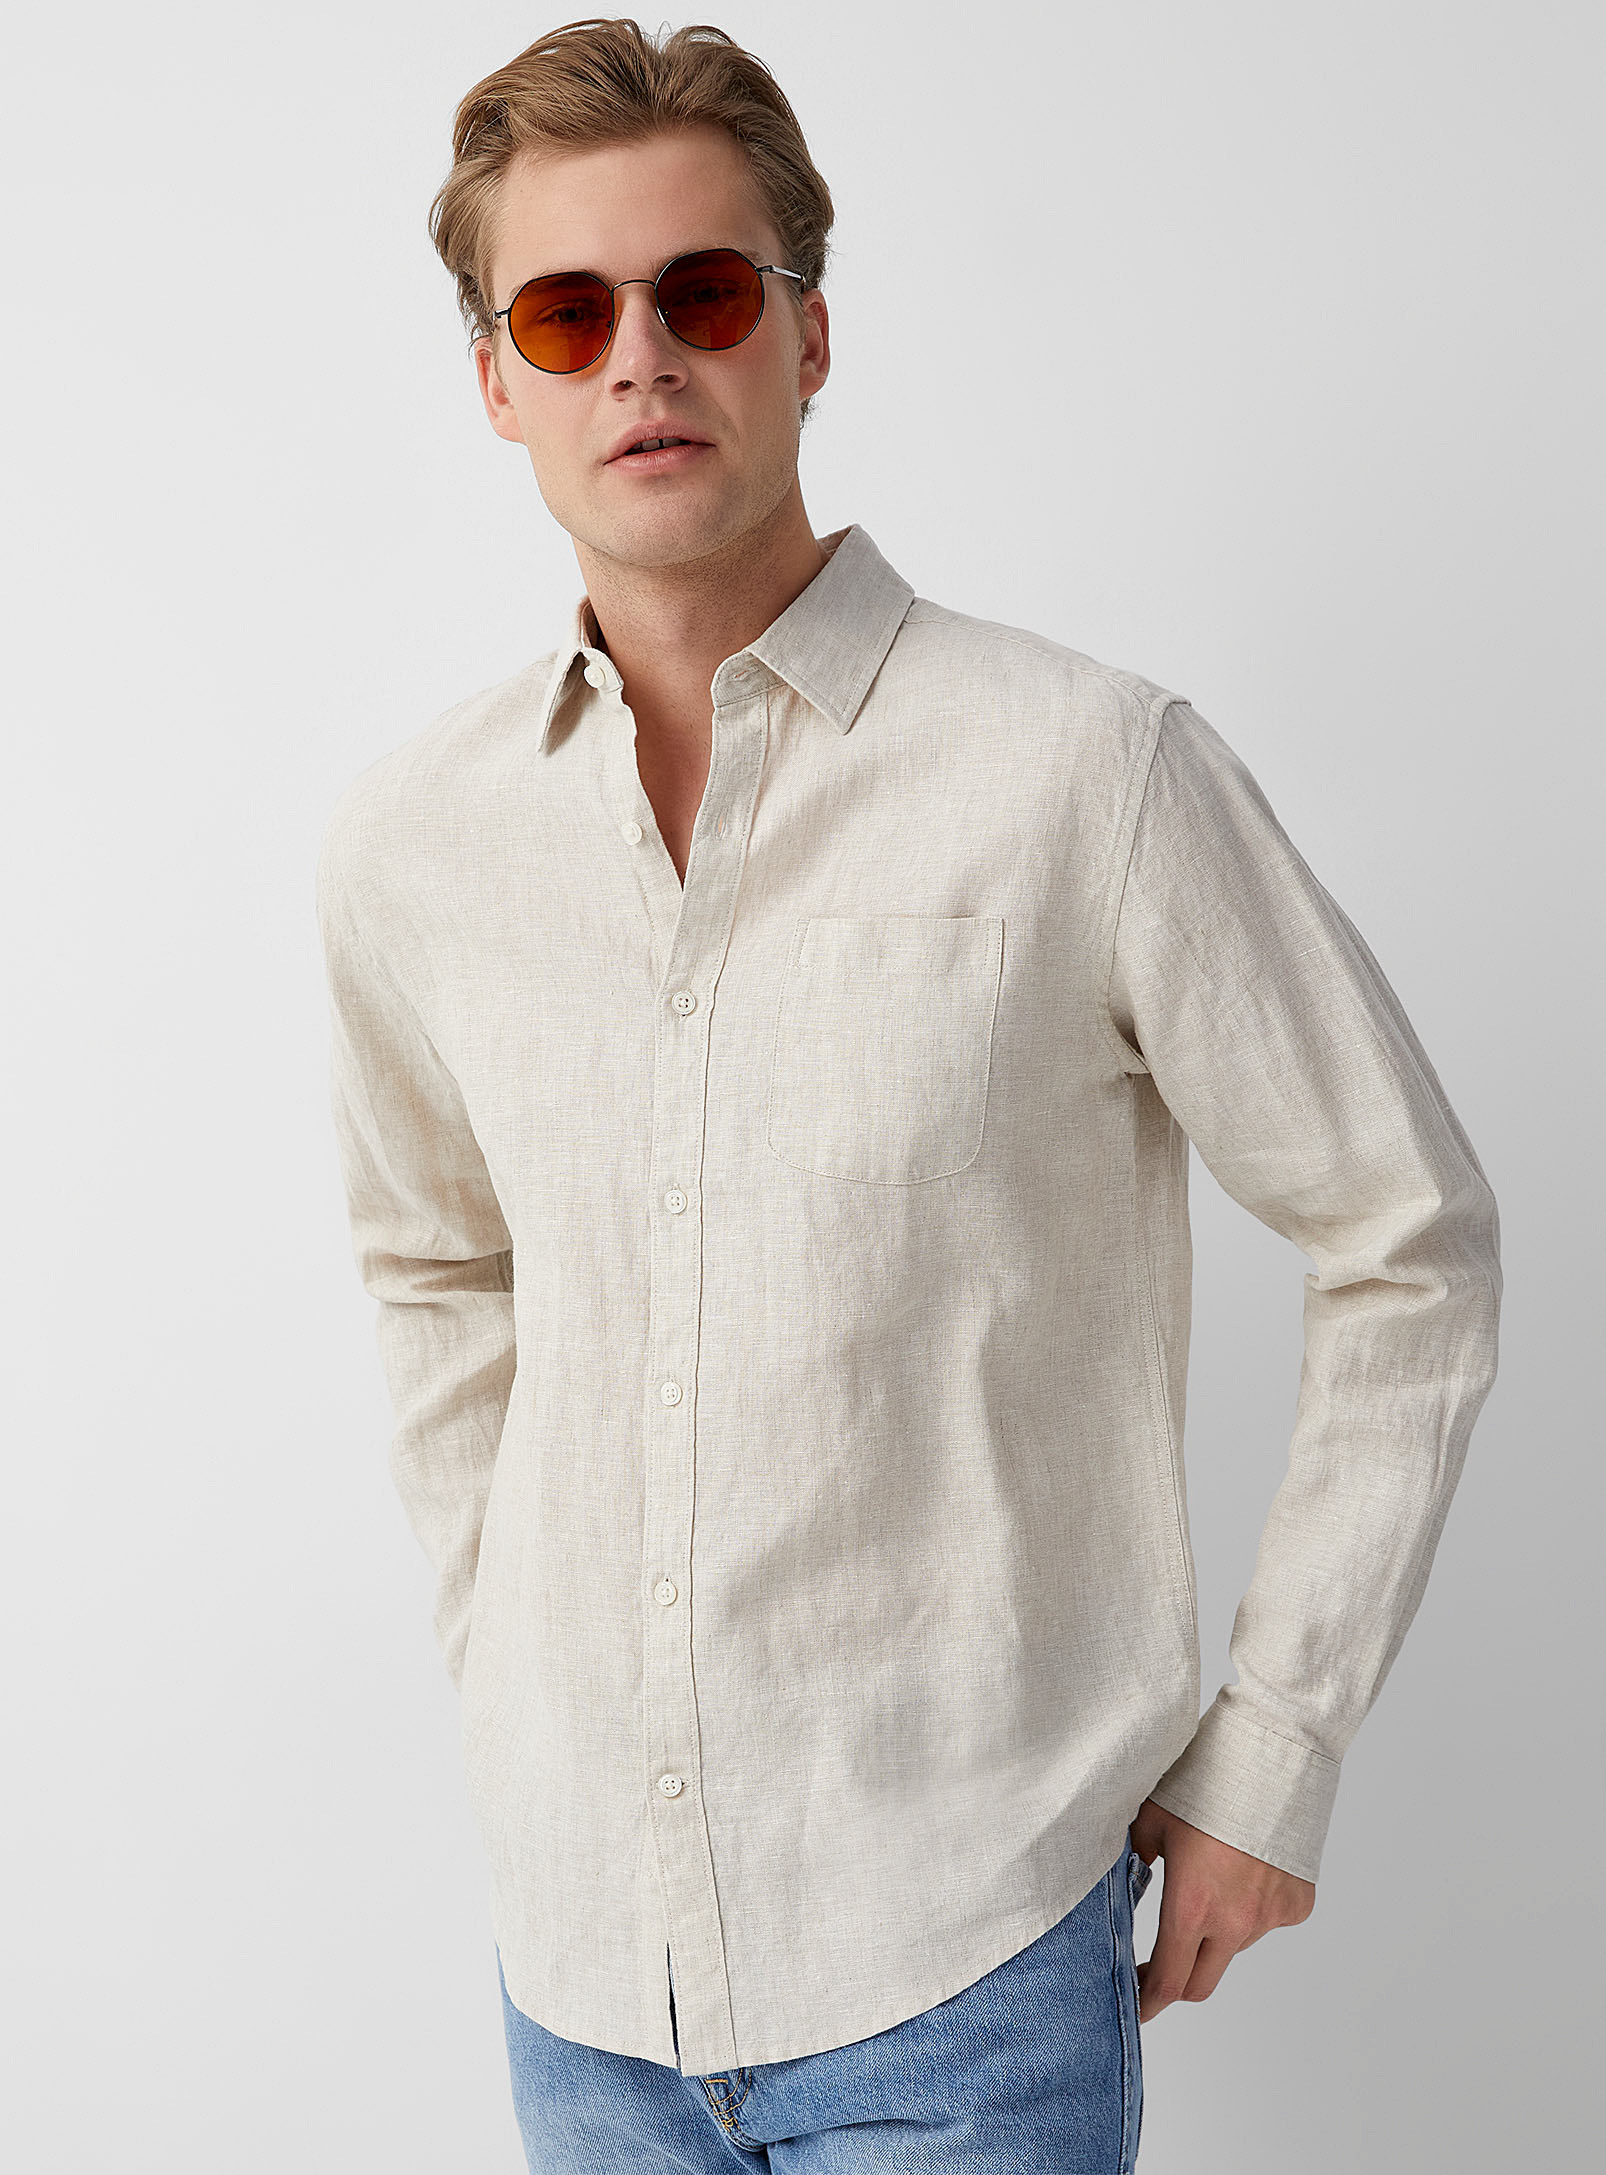 person wearing the linen shirt with jeans and sunglasses